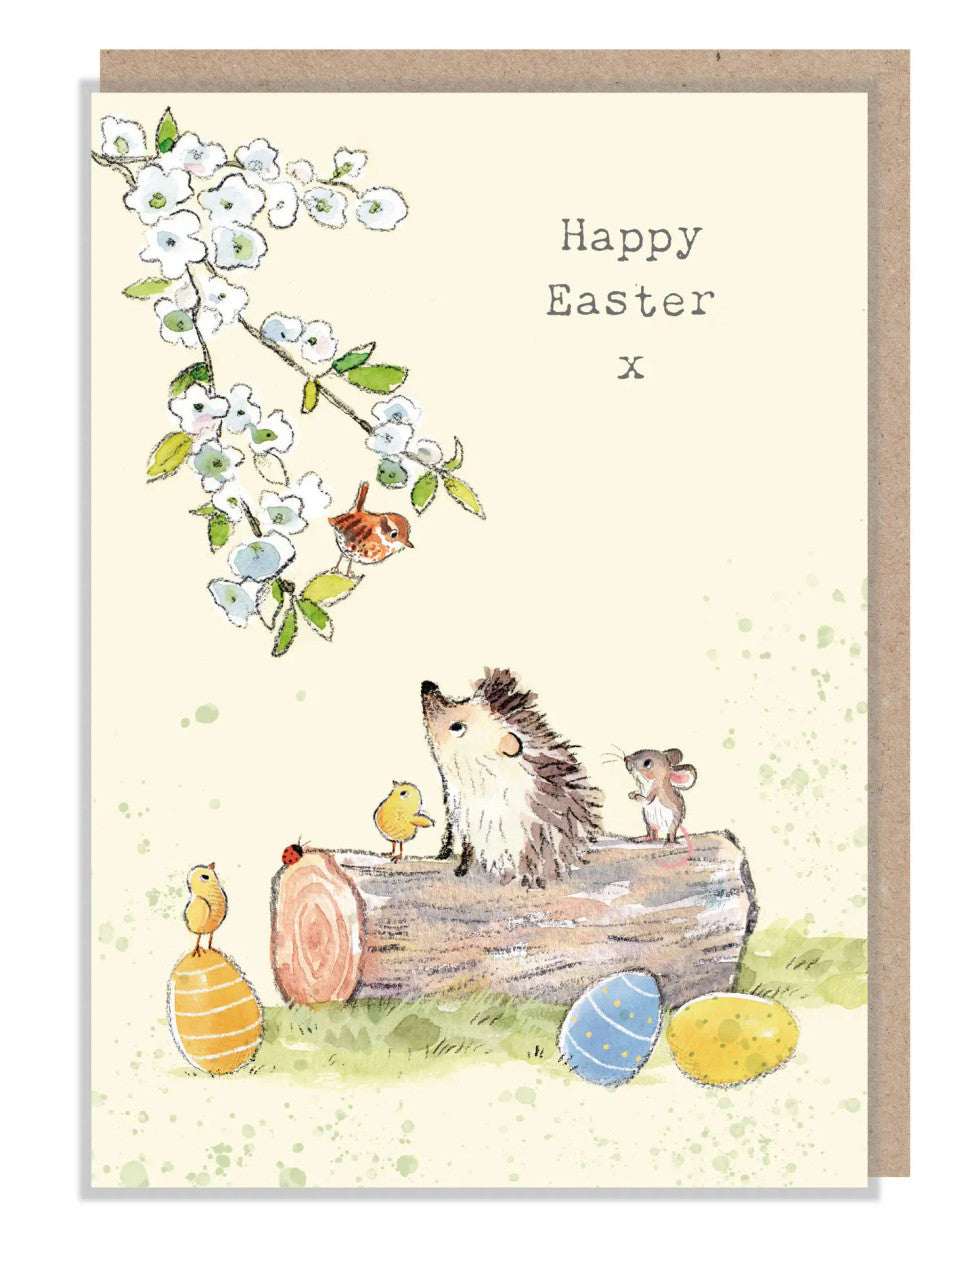 Hedgehog & Friends Happy Easter Greetings Card by Paper Shed Design